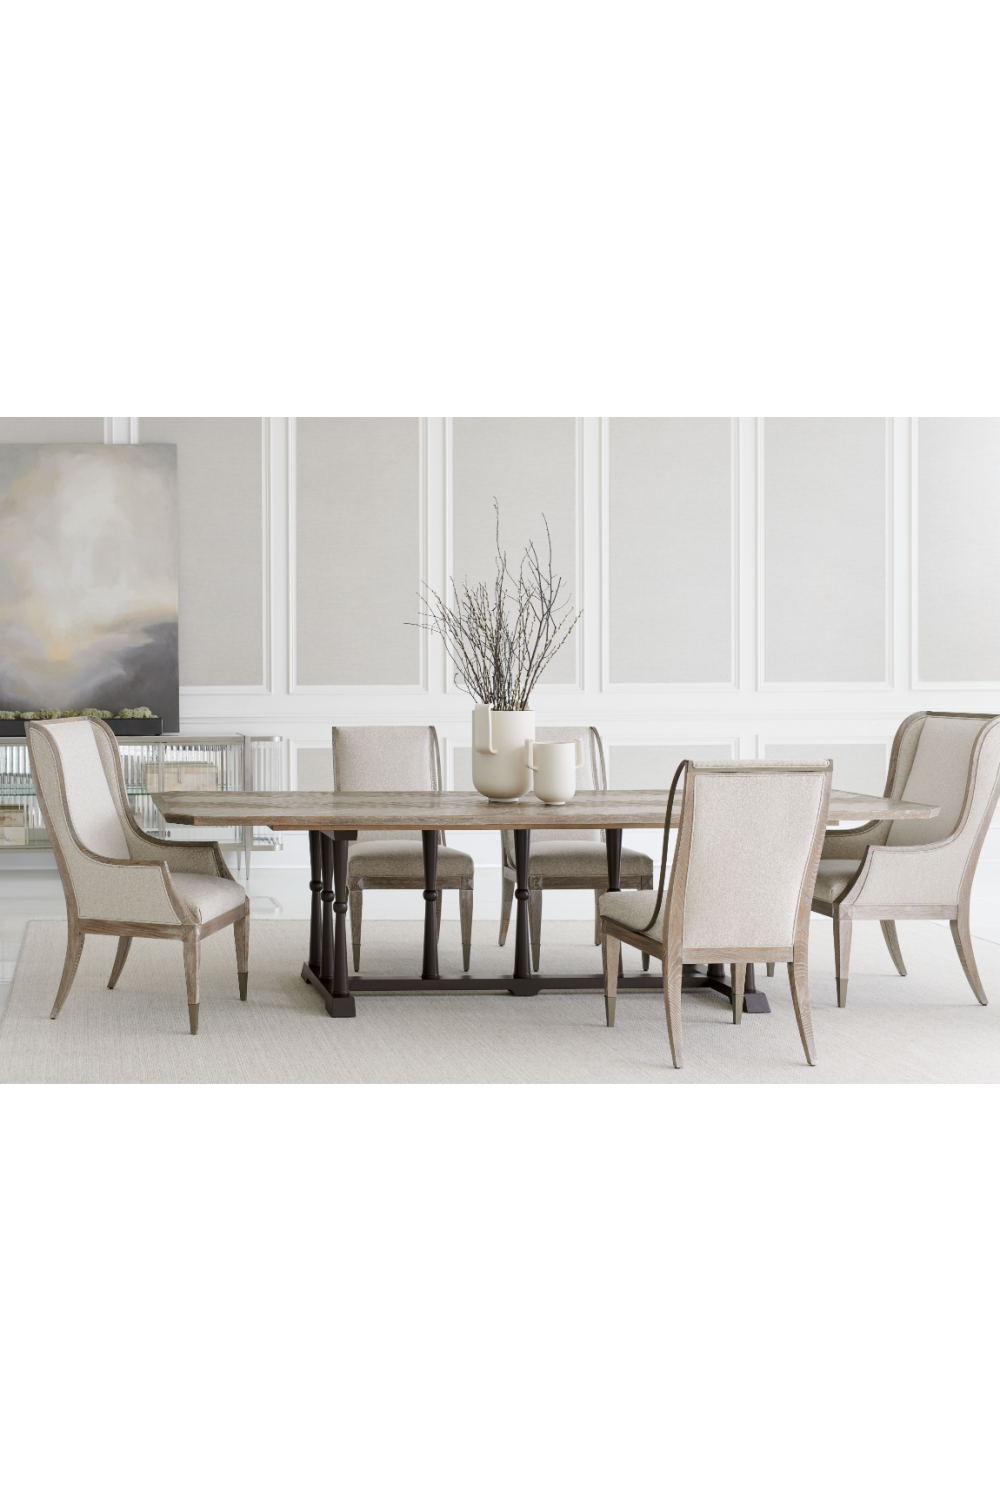 Ash Driftwood Classic Dining Table | Caracole Dinner Circuit 96 | Oroa.com